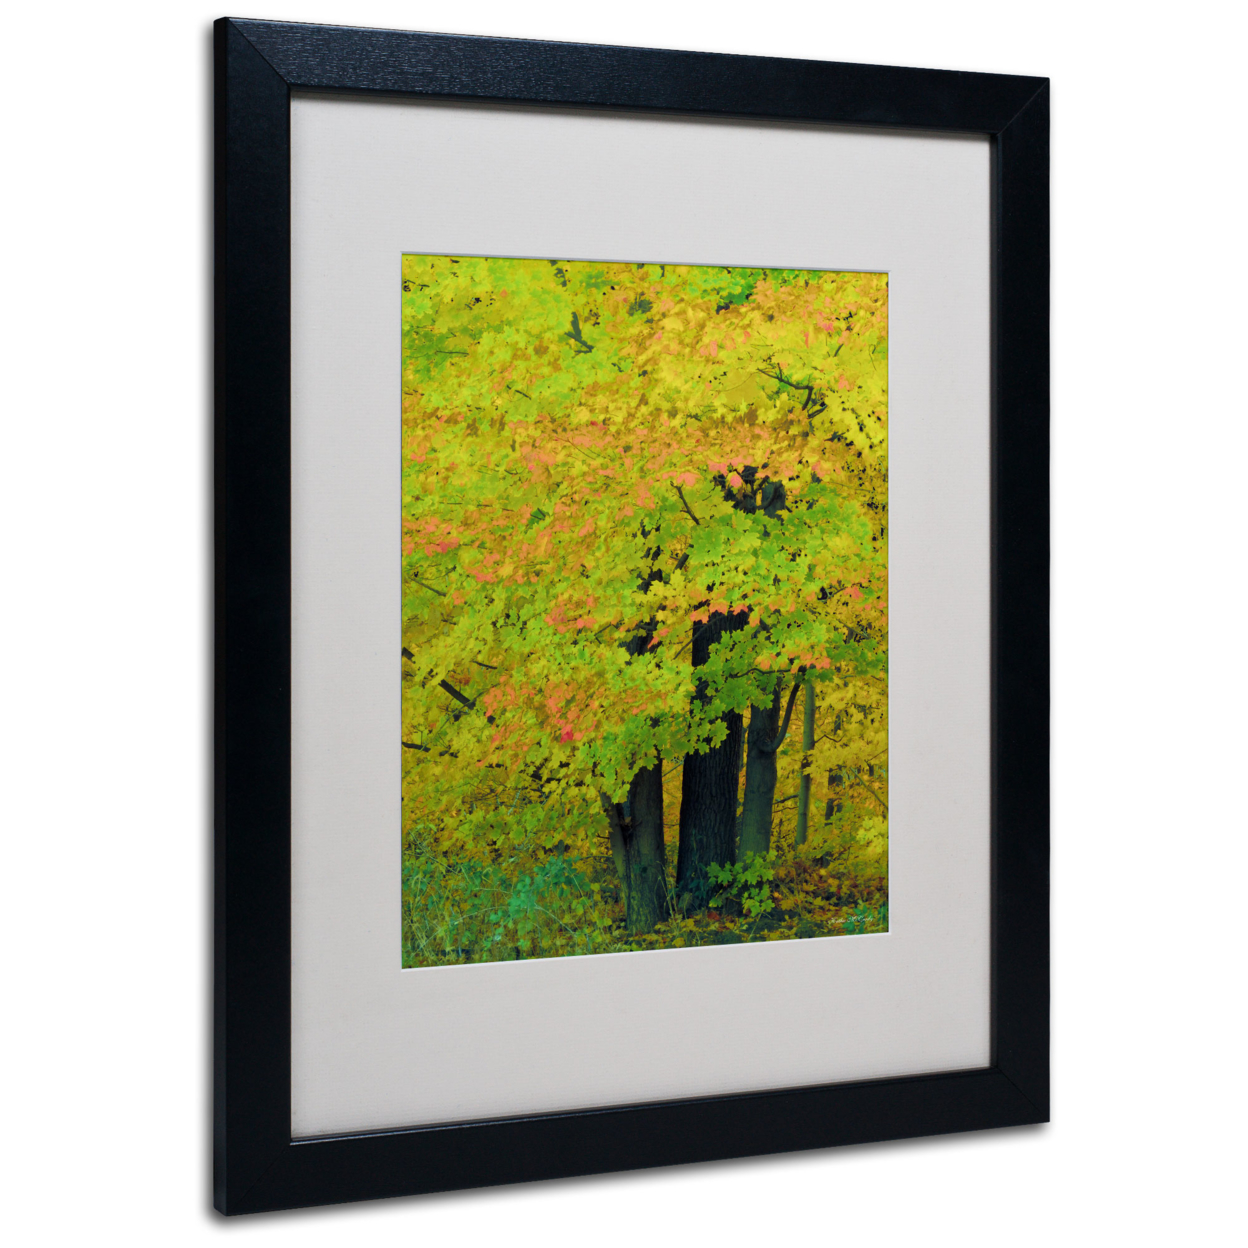 Kathie McCurdy 'Forest Beauty' Black Wooden Framed Art 18 X 22 Inches